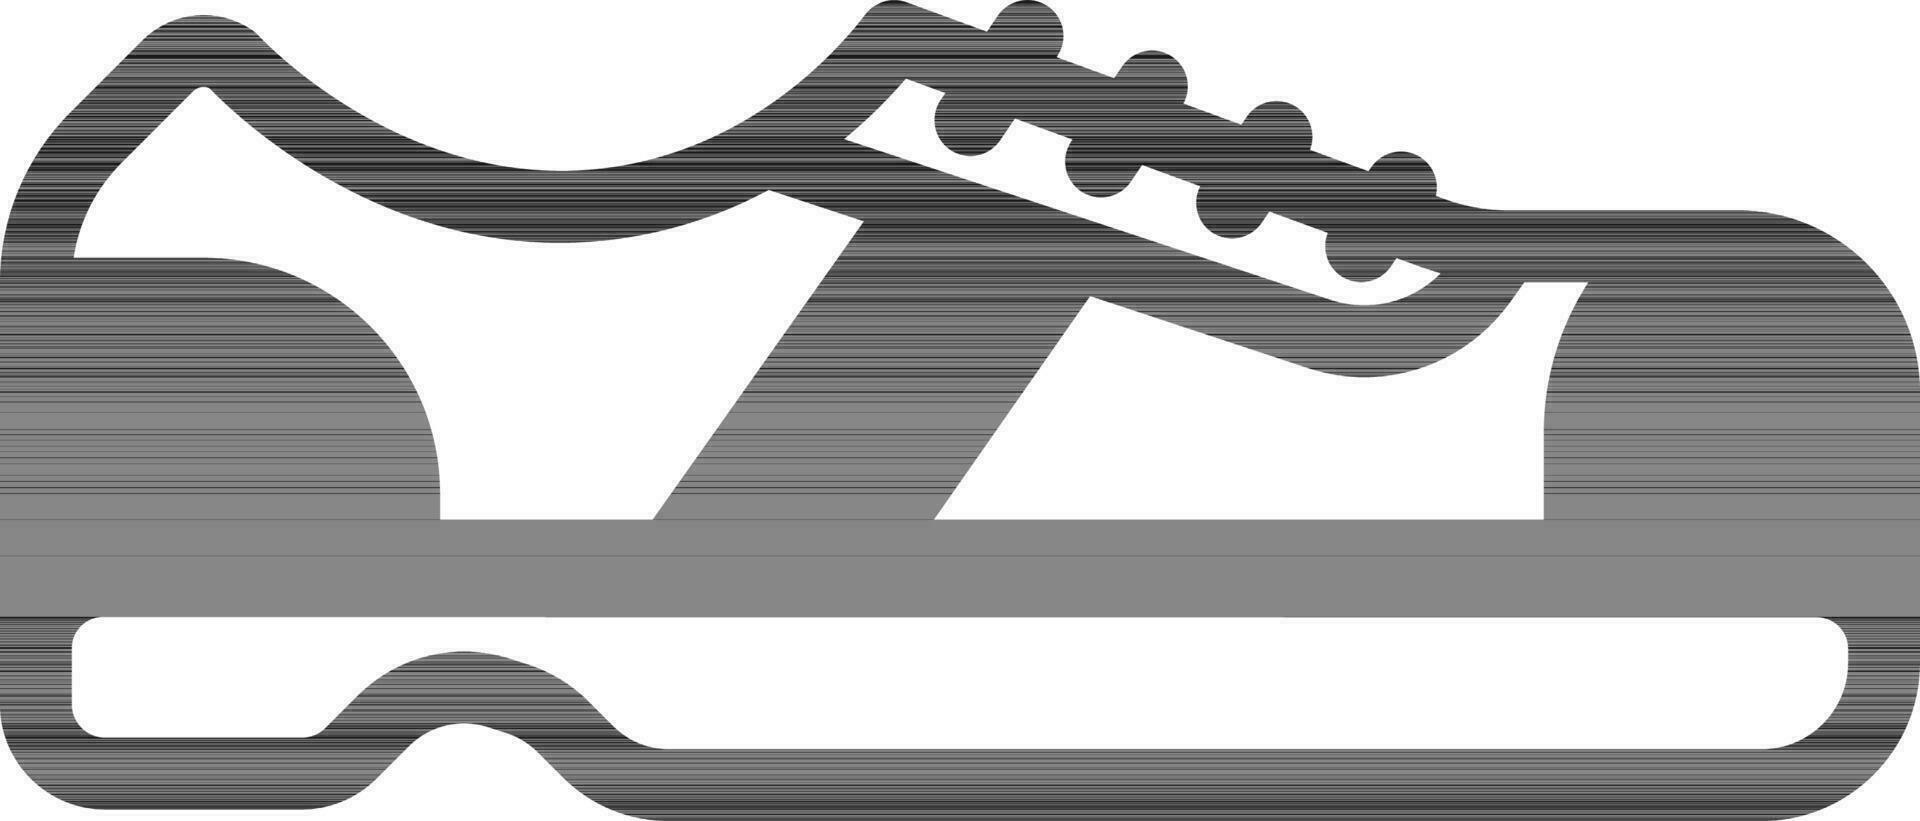 Isolated Shoes Icon in black and white Color. vector